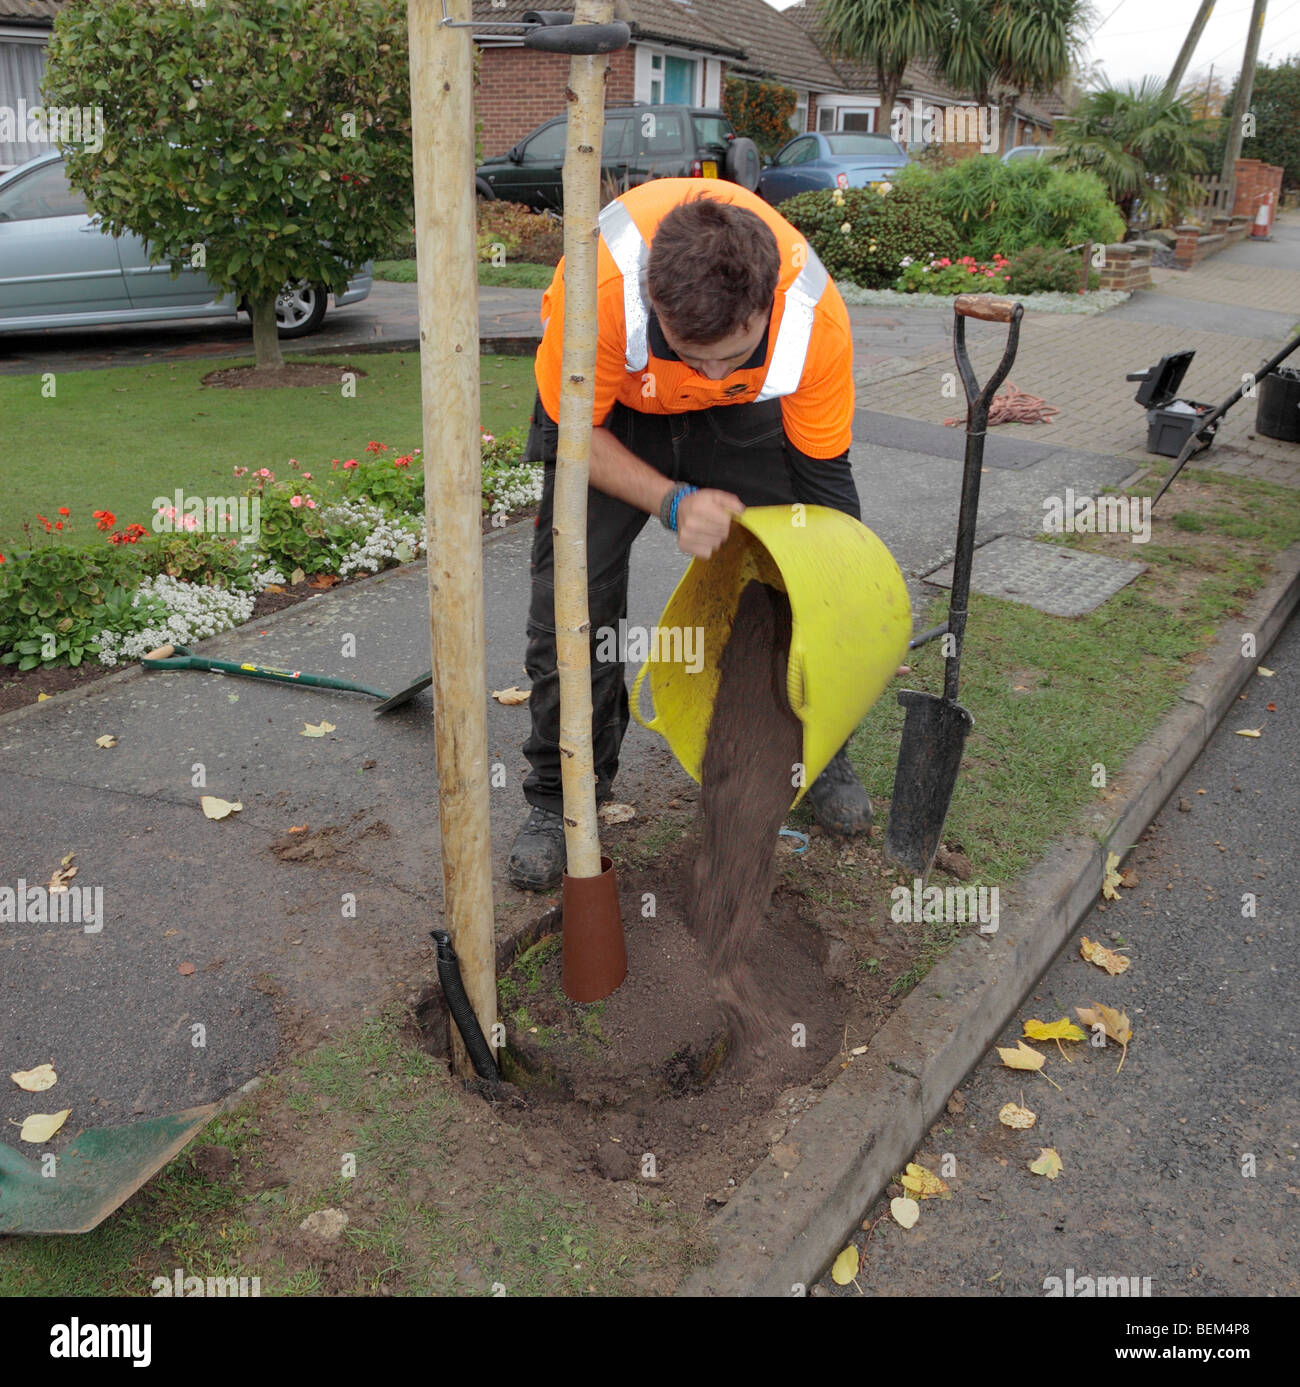 Man planting a tree in a street. Stock Photo